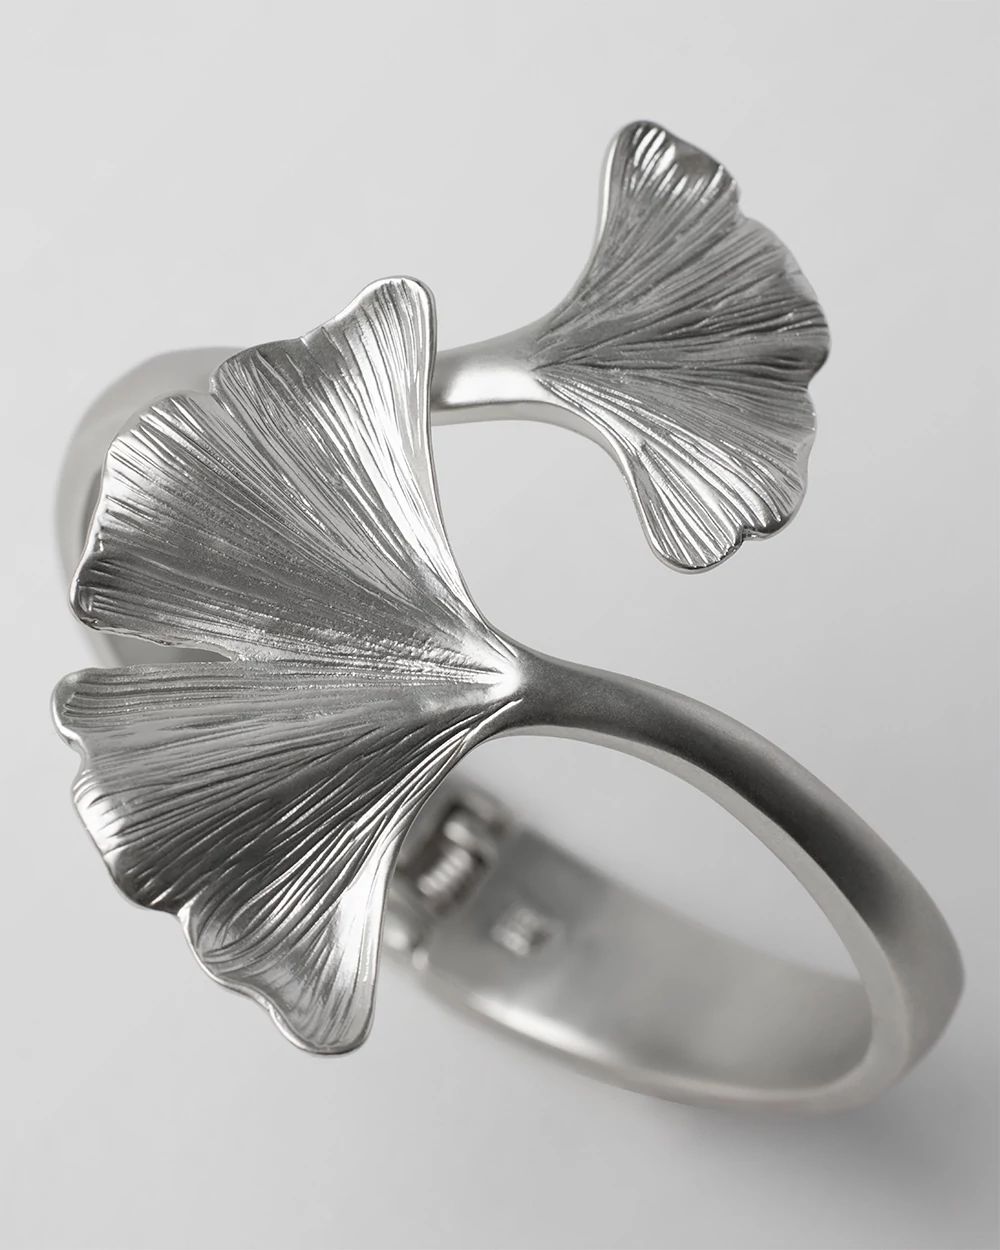 Silvertone Leaf Cuff Bracelet click to view larger image.